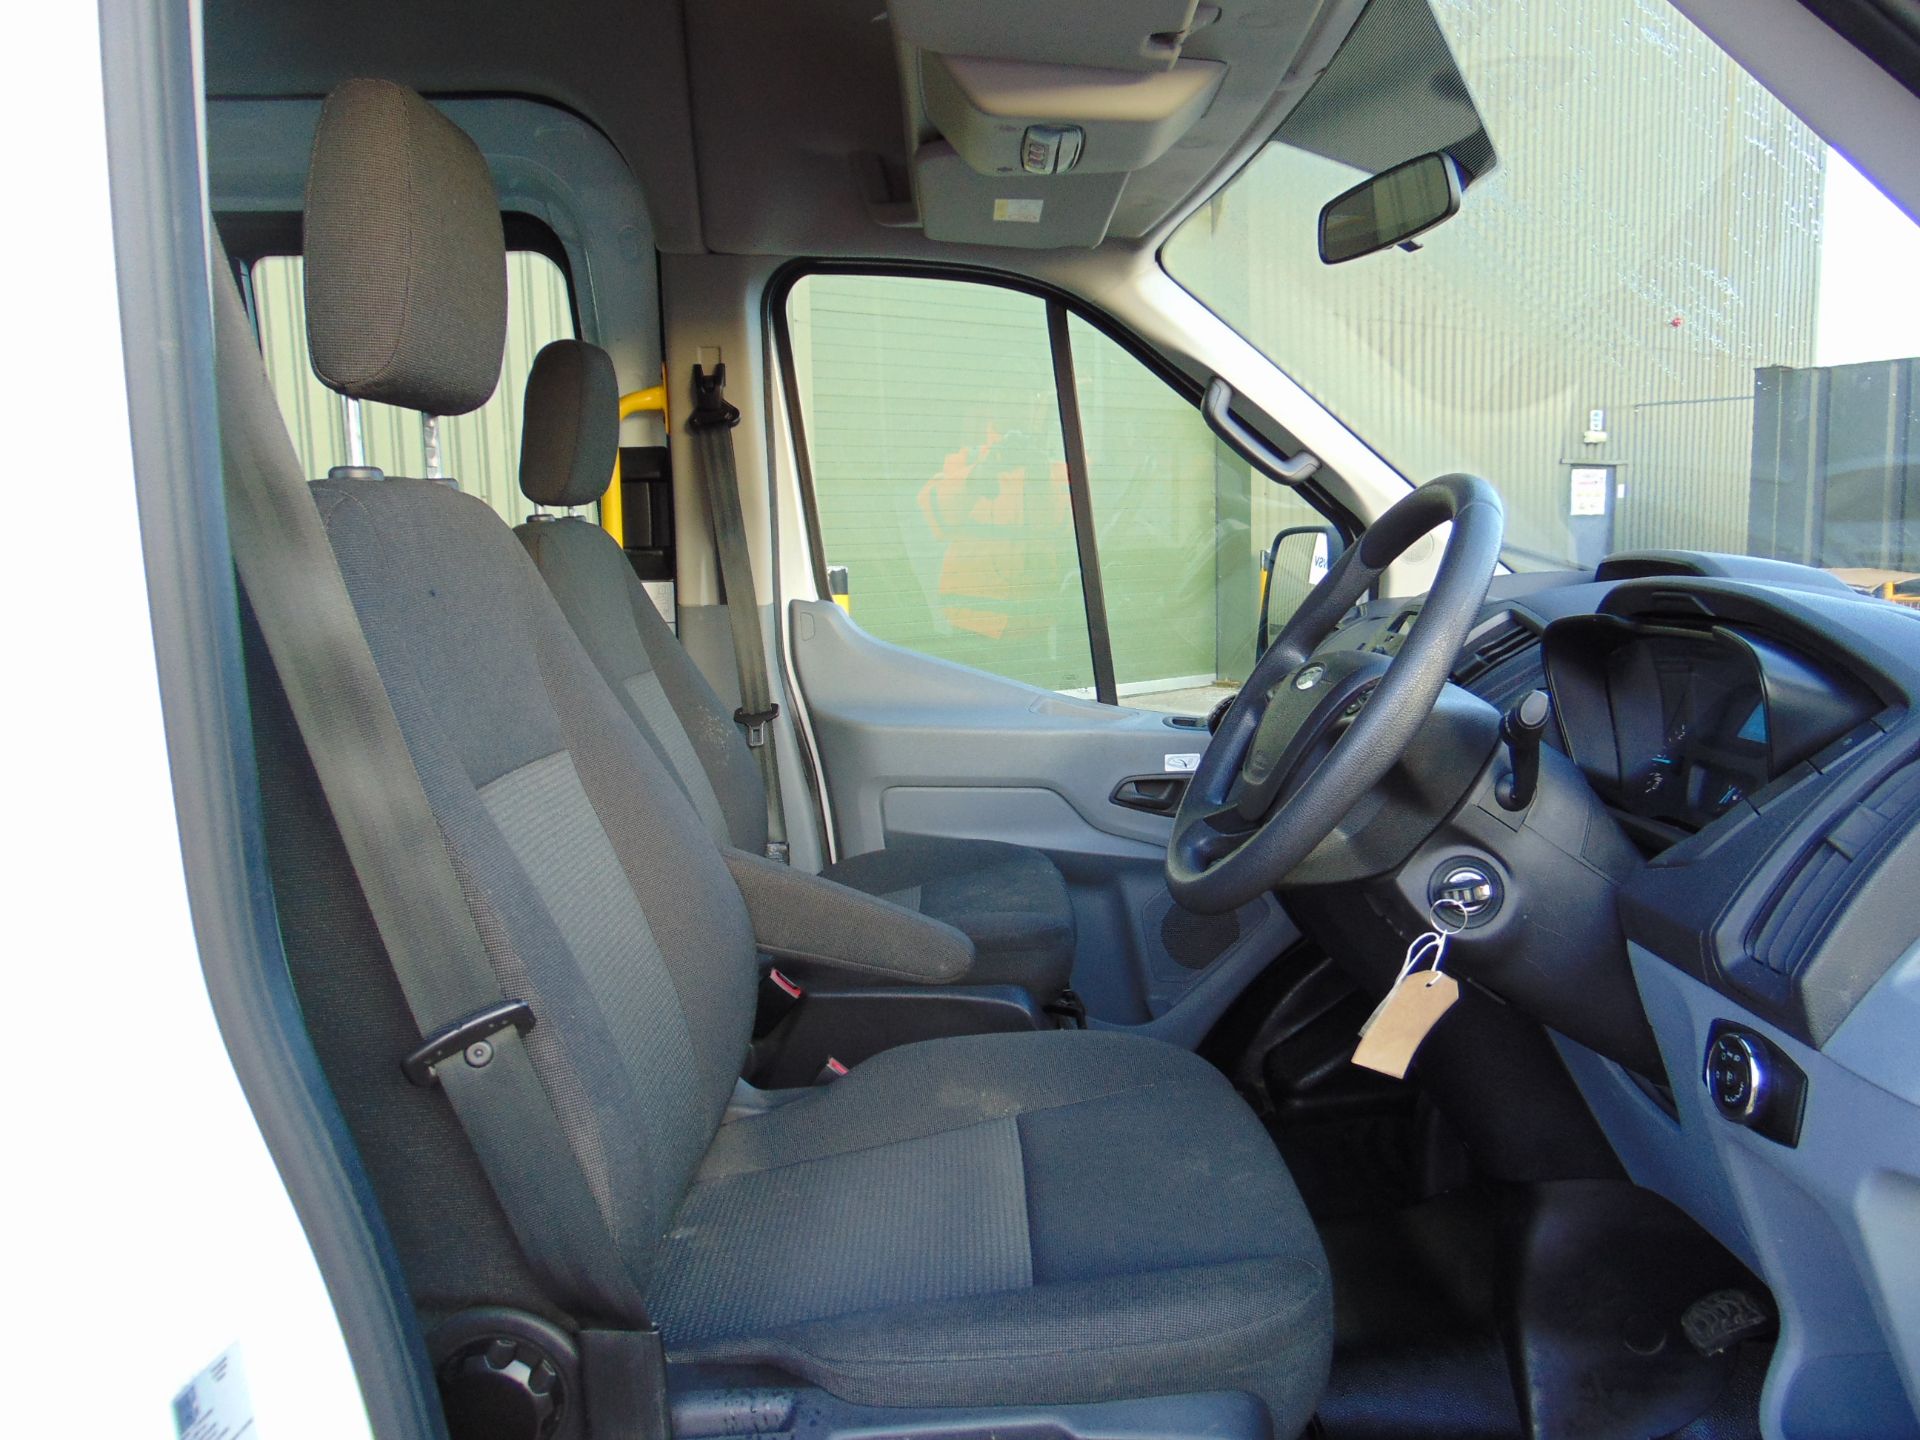 2014 Ford Transit 2.2 TDCI 460 17 Seat Minibus Only 72,000 kms ( 44,000 miles ) - Image 23 of 31